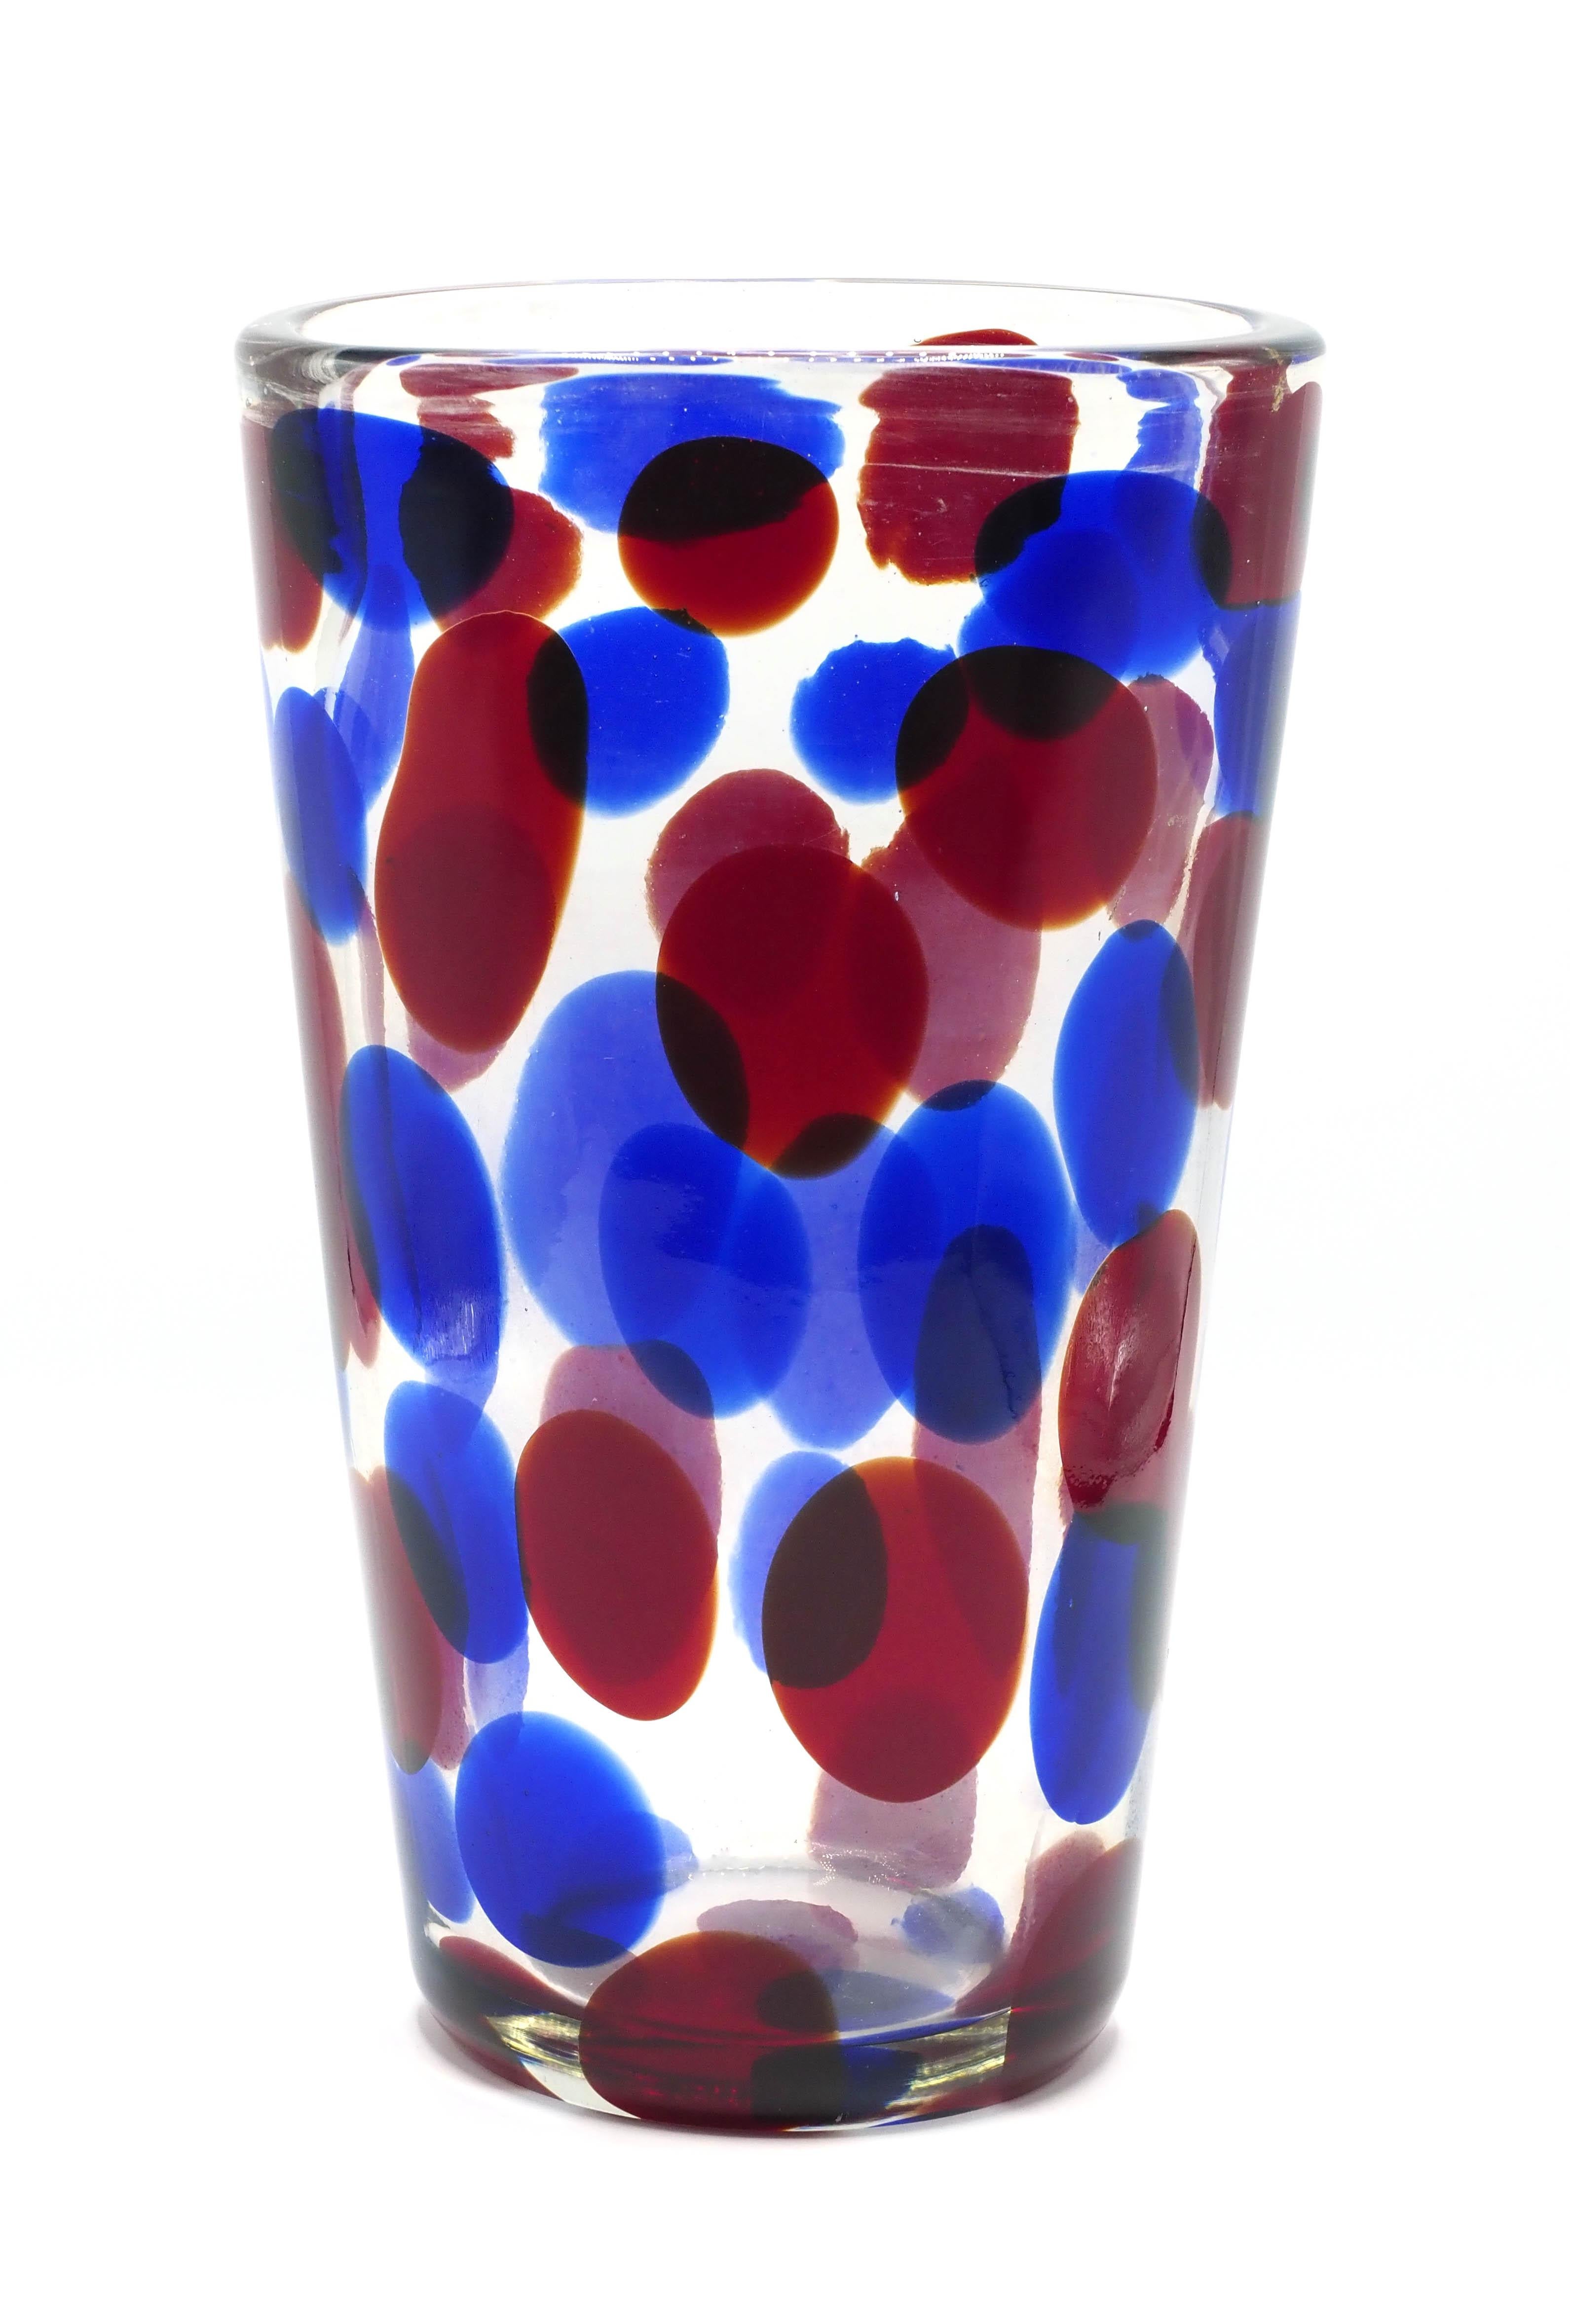 Blue-and-red-spotted Murano crystal vase by Aureliano Toso – 1950s
This cylindrical vase was designed and created by glass-blower Aureliano Toso (1884 – 1979) in Murano - Venice during the 1950s.
Made of transparent crystal (lead glass), it